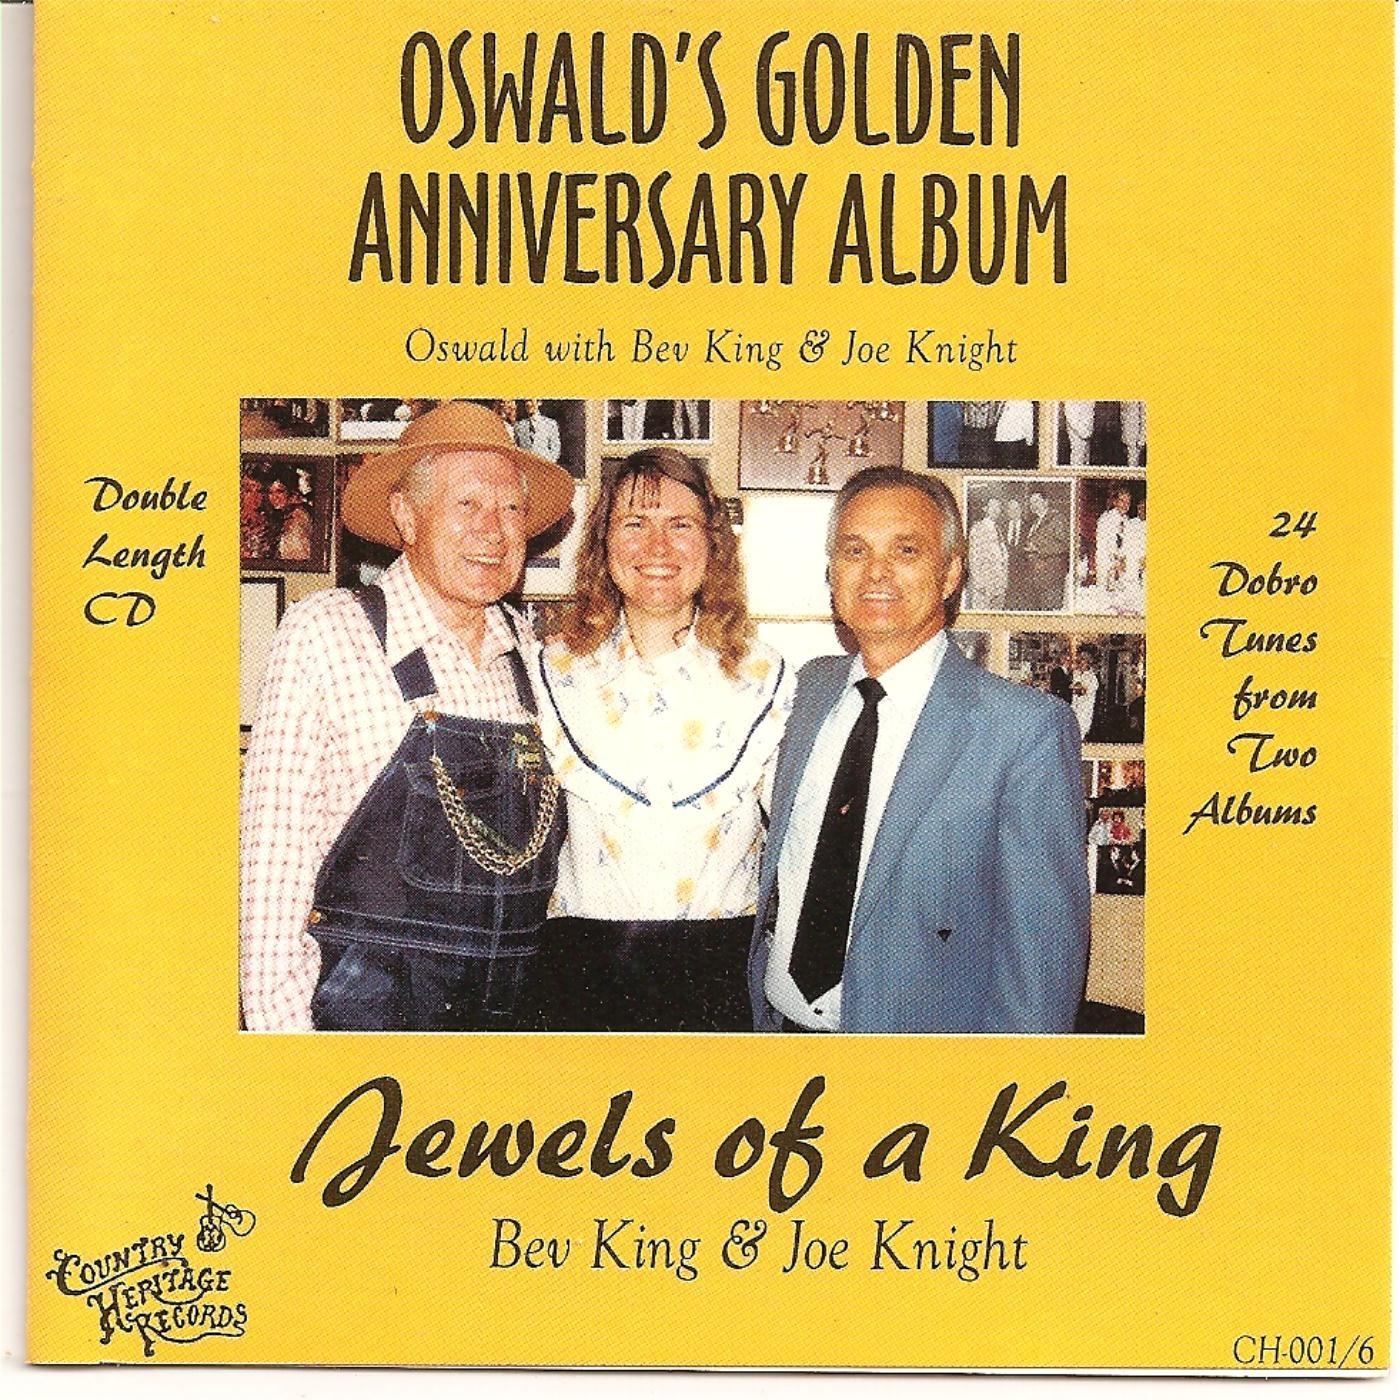 Oswald's Golden Anniversary Album / Jewels of a King